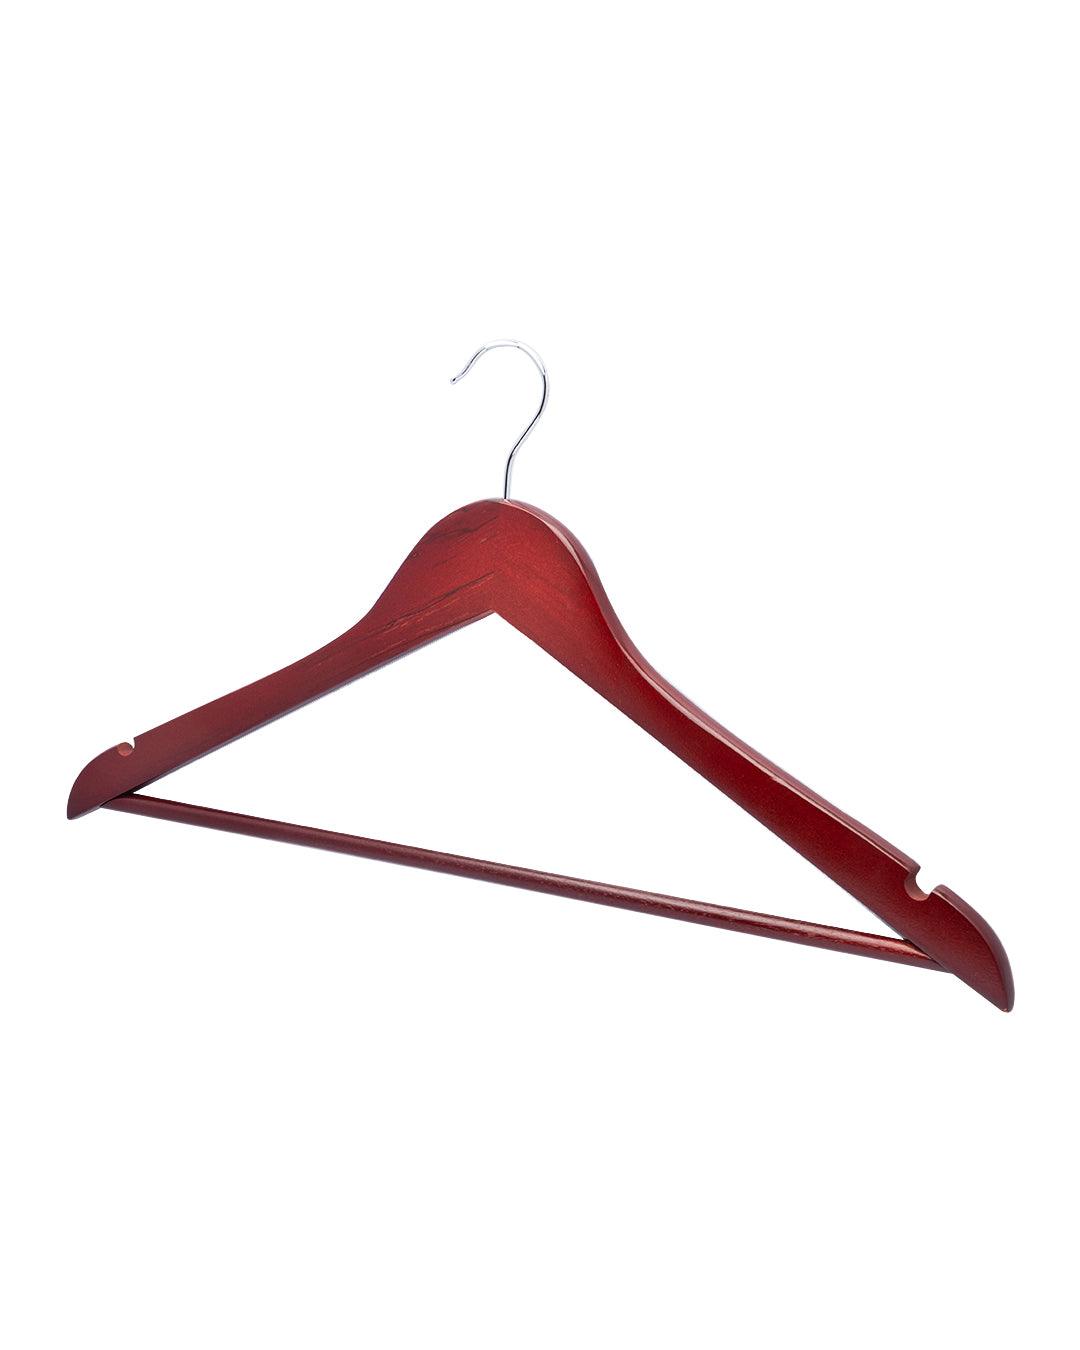 Buy Market99 Metal Heavy Duty Hangers - Set of 10 at the best price on  Tuesday, February 27, 2024 at 6:48 pm +0530 with latest offers in India.  Get Free Shipping on Prepaid order above Rs ₹149 – MARKET99